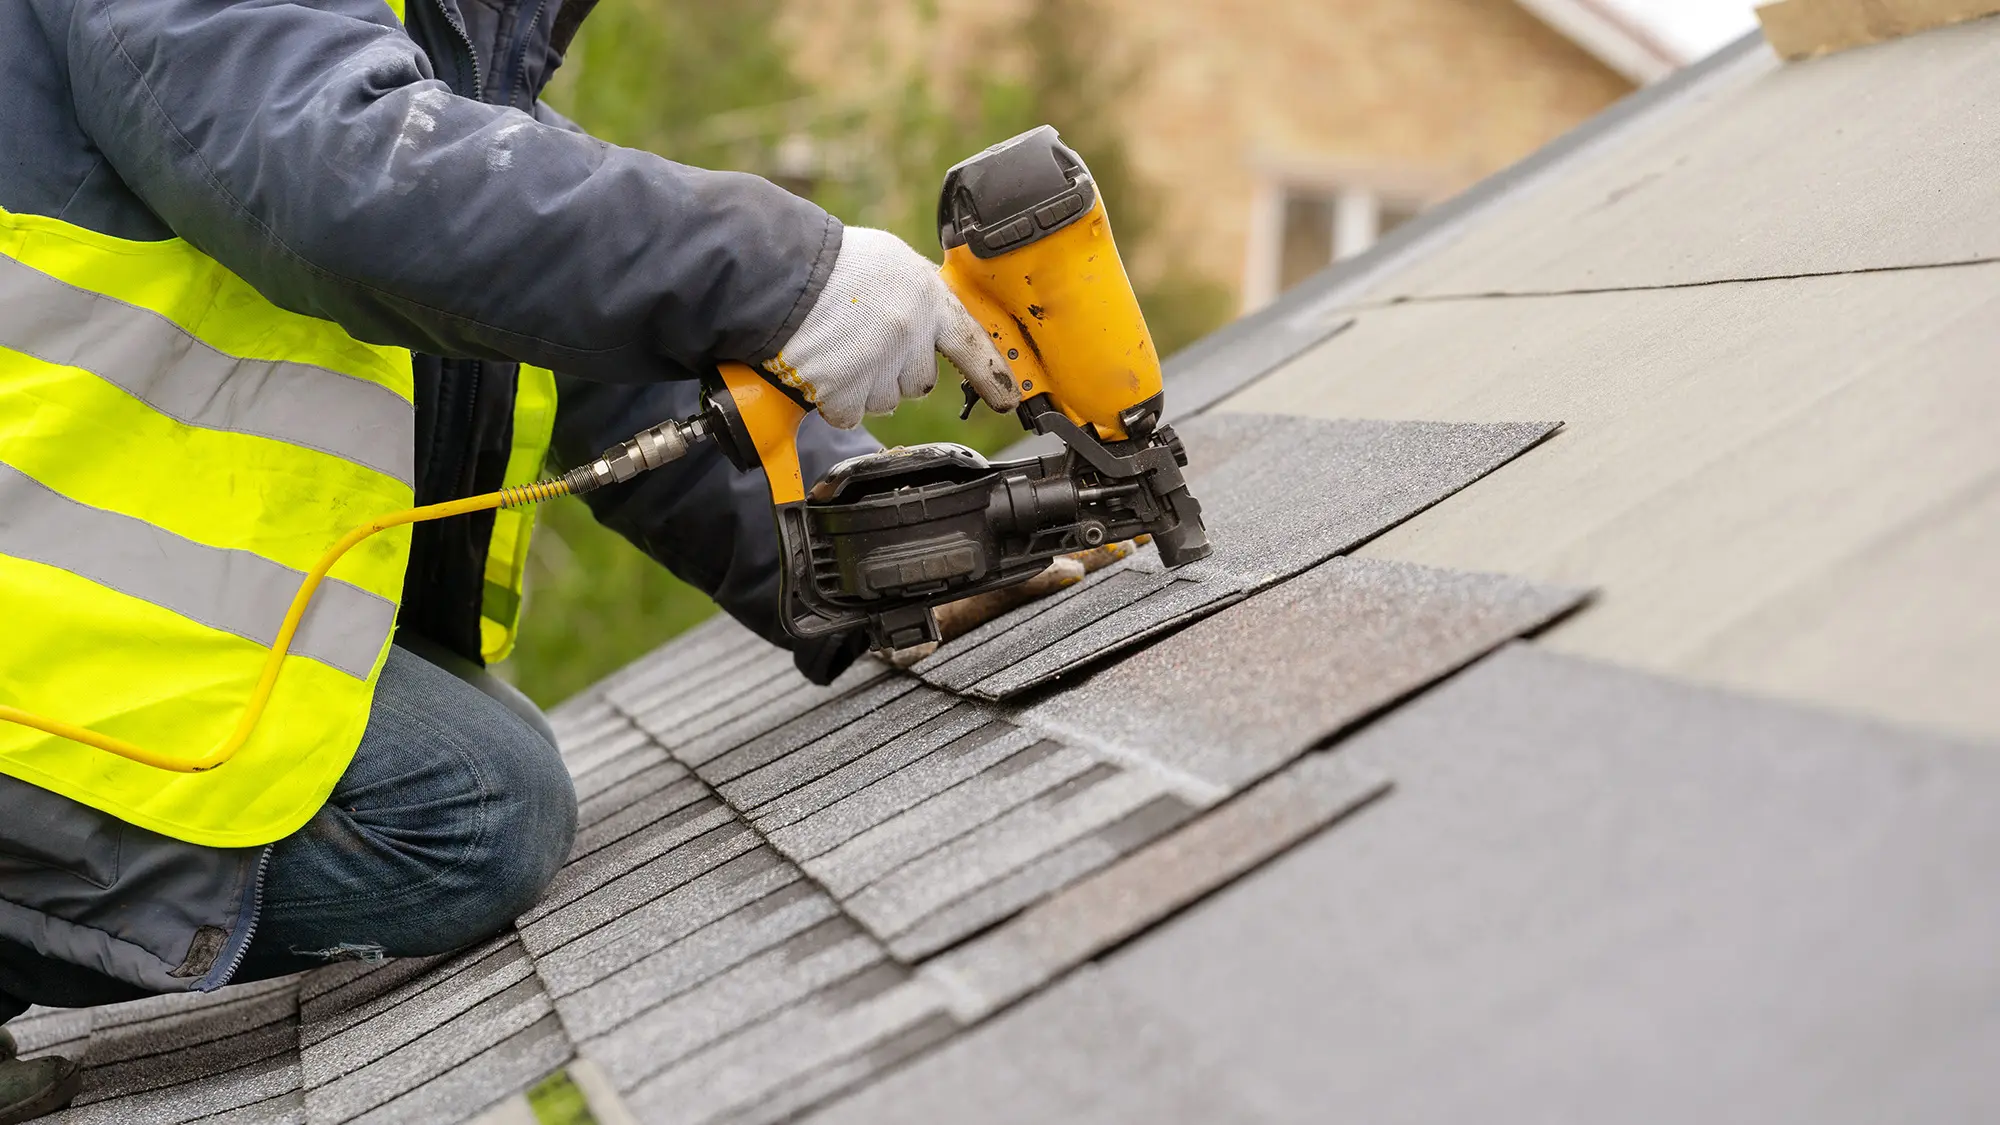 A New Roof Enhance Your Home's Appearance